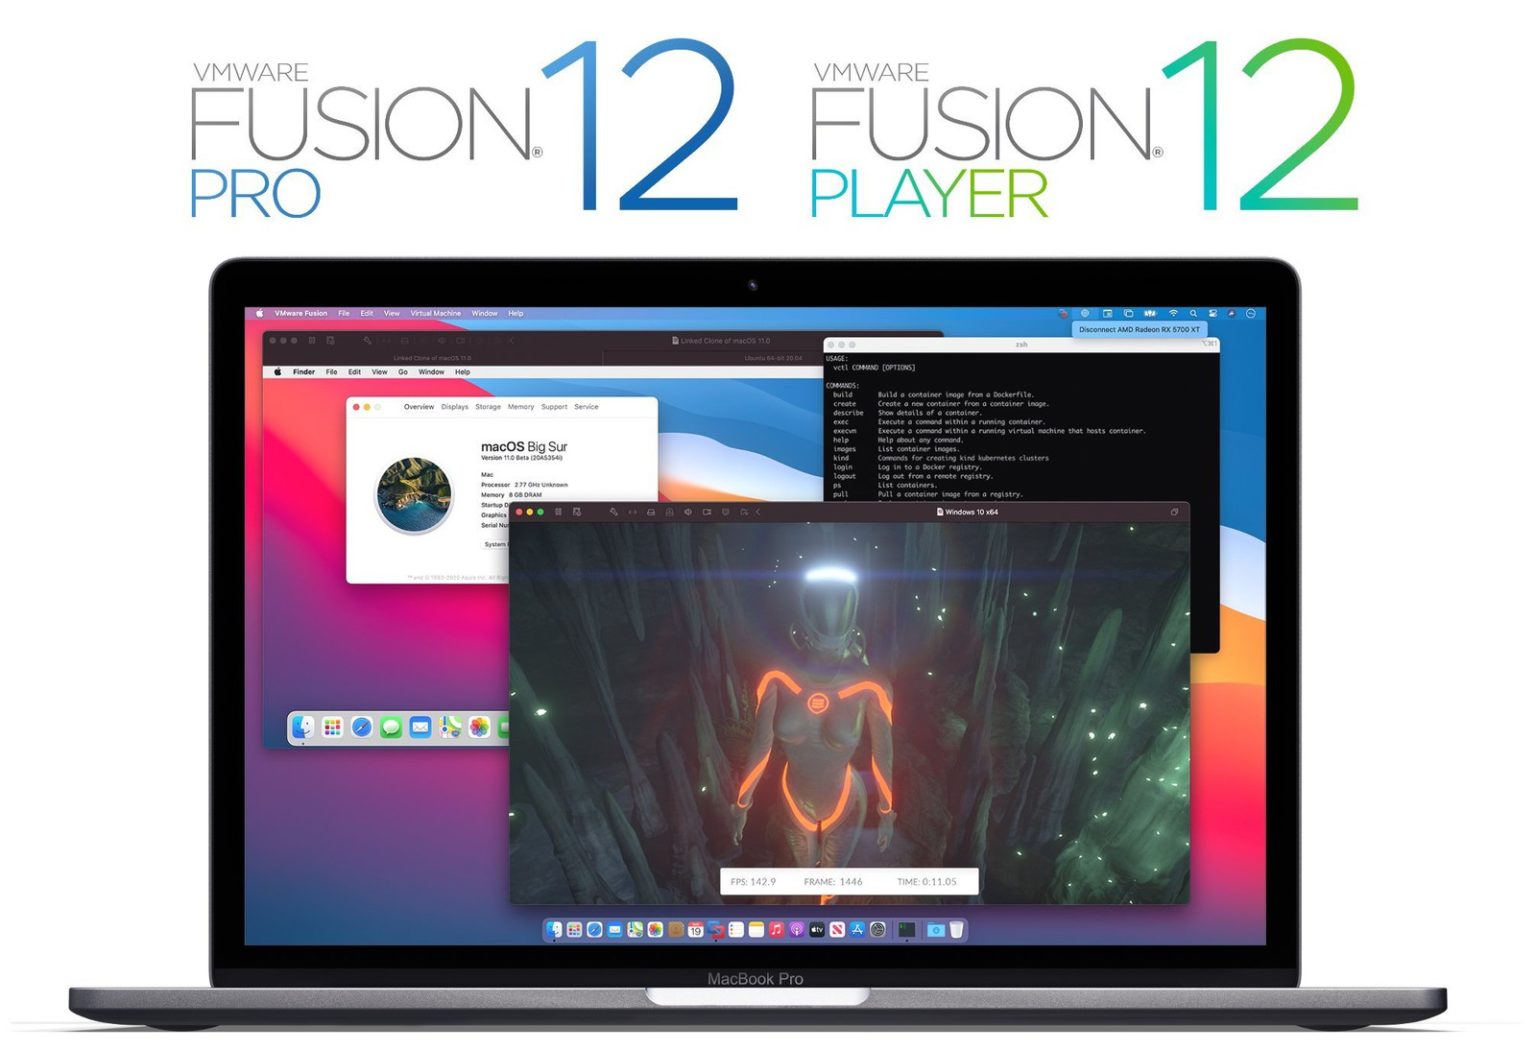 download the last version for mac VOVSOFT Window Resizer 2.6